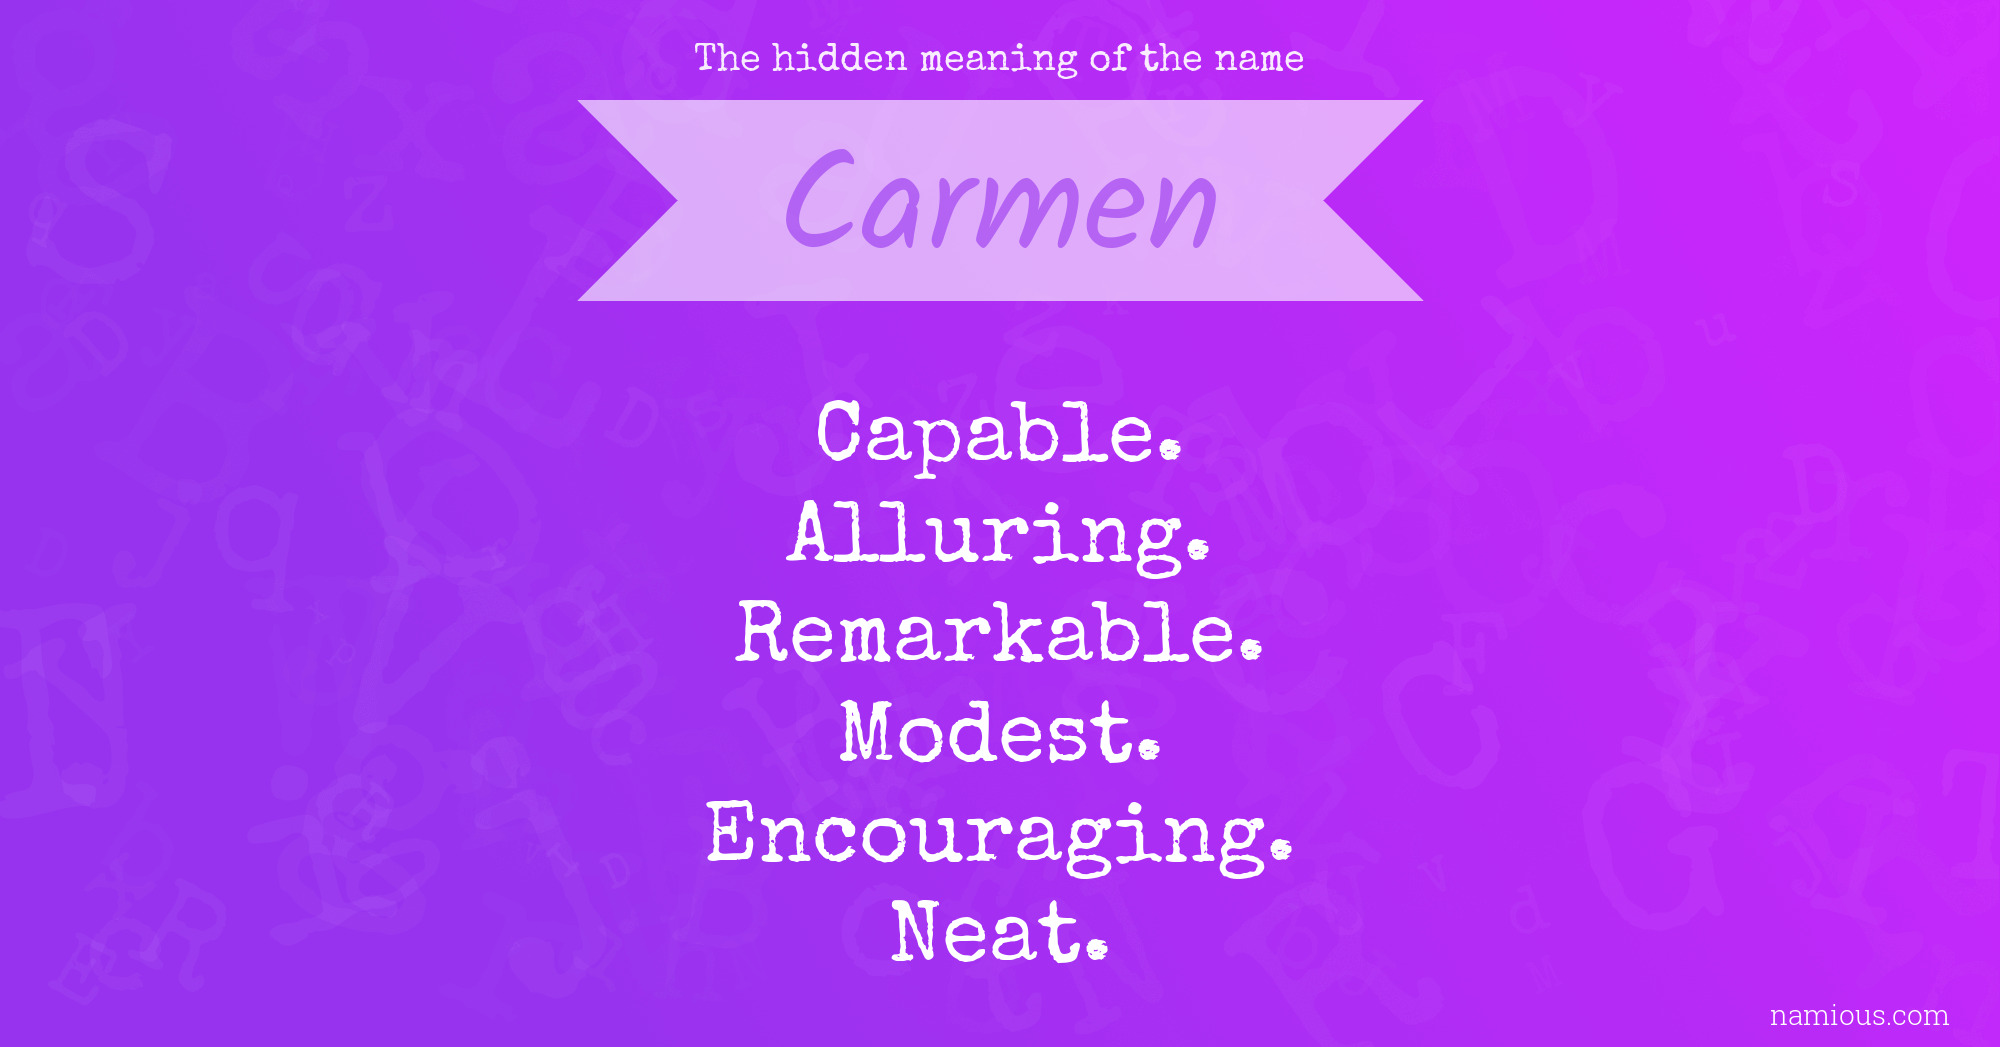 The hidden meaning of the name Carmen